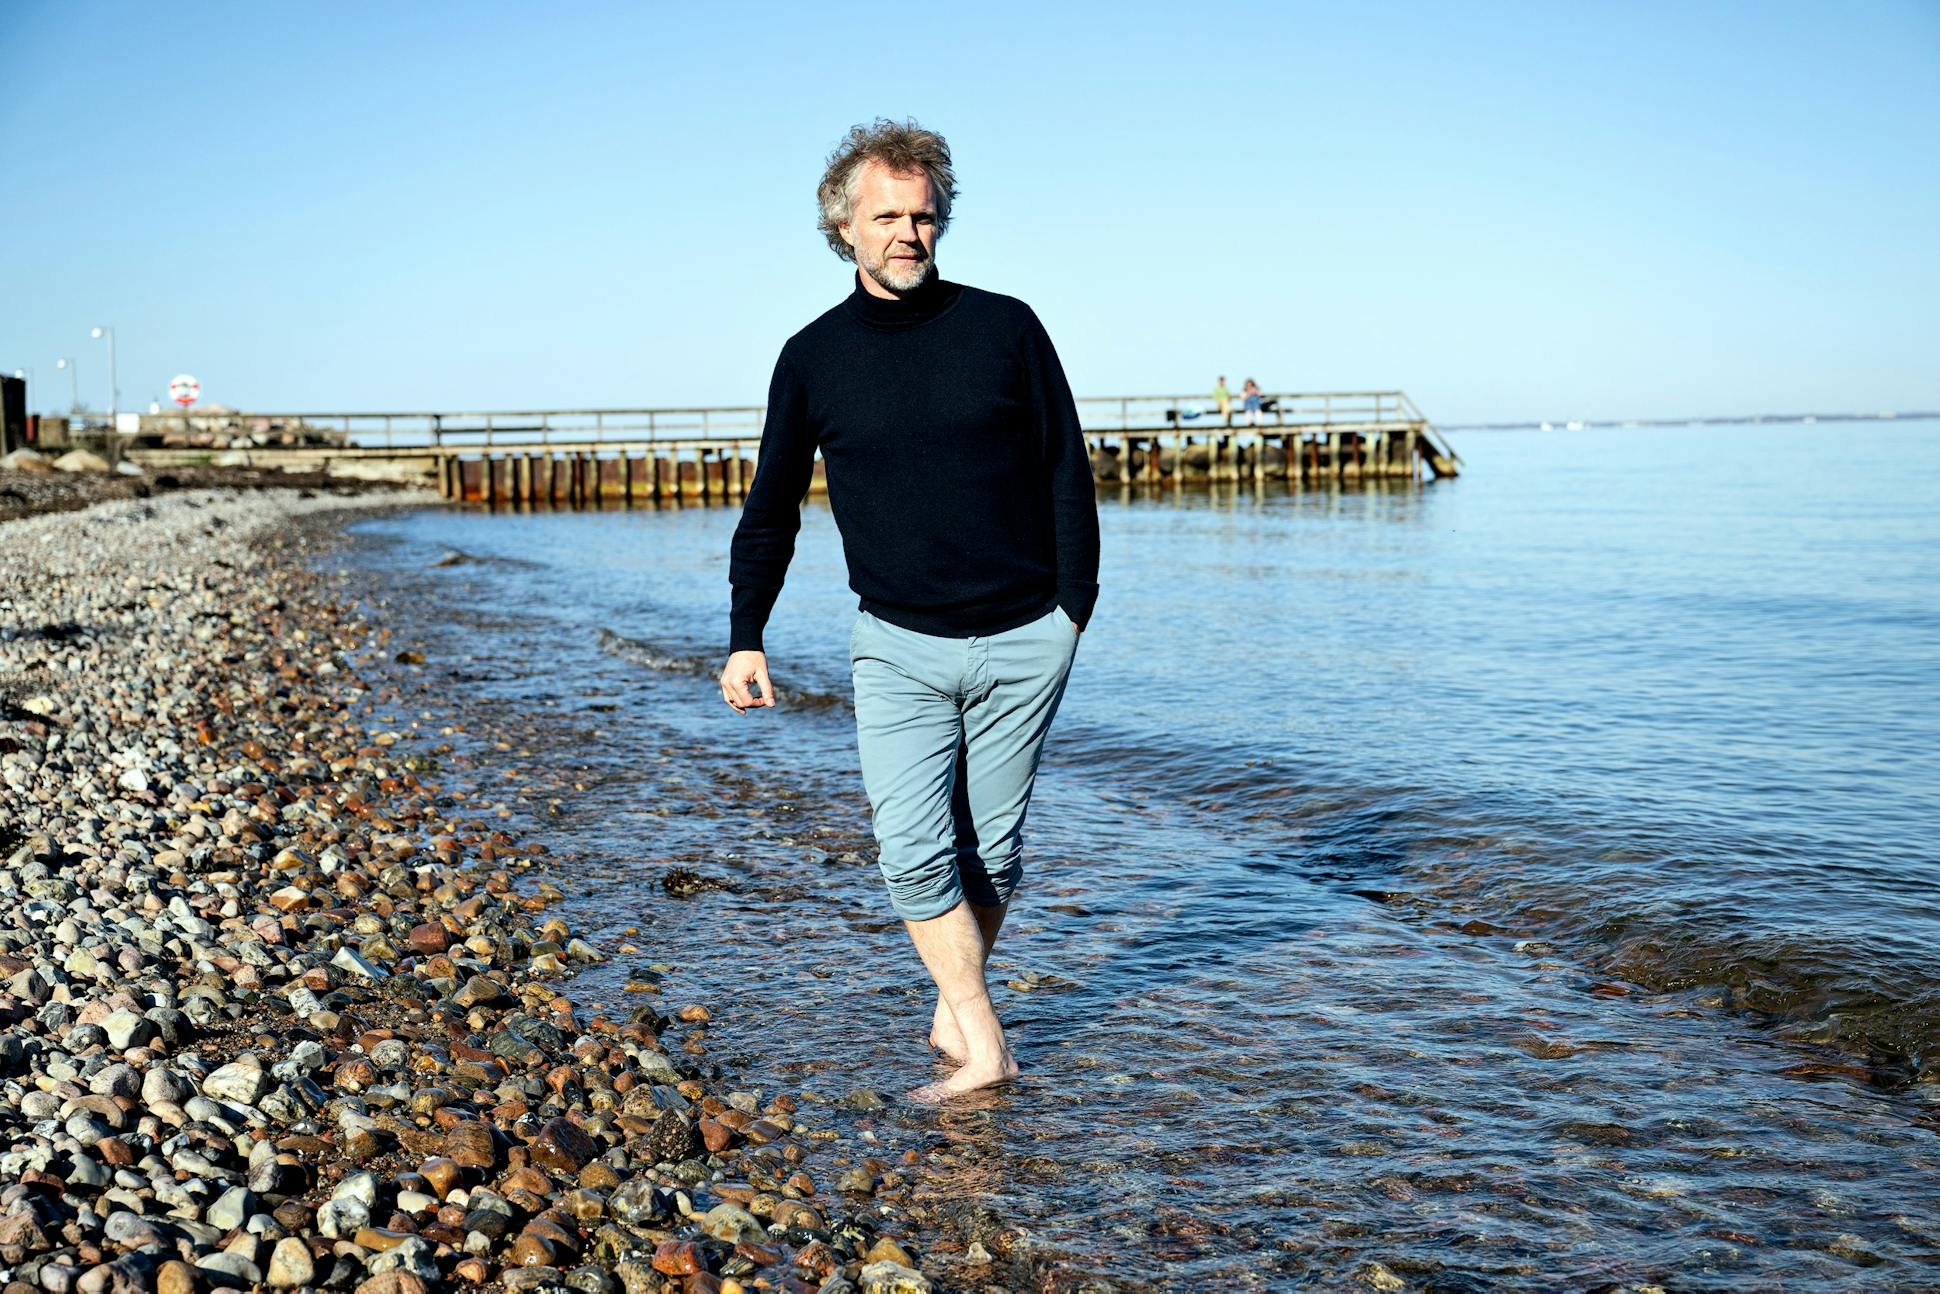 While visiting the Louisiana Museum of Modern Art, north of Copenhagen, Thomas Søndergård peeled off his socks and walked on the shore of Øresund Sound.